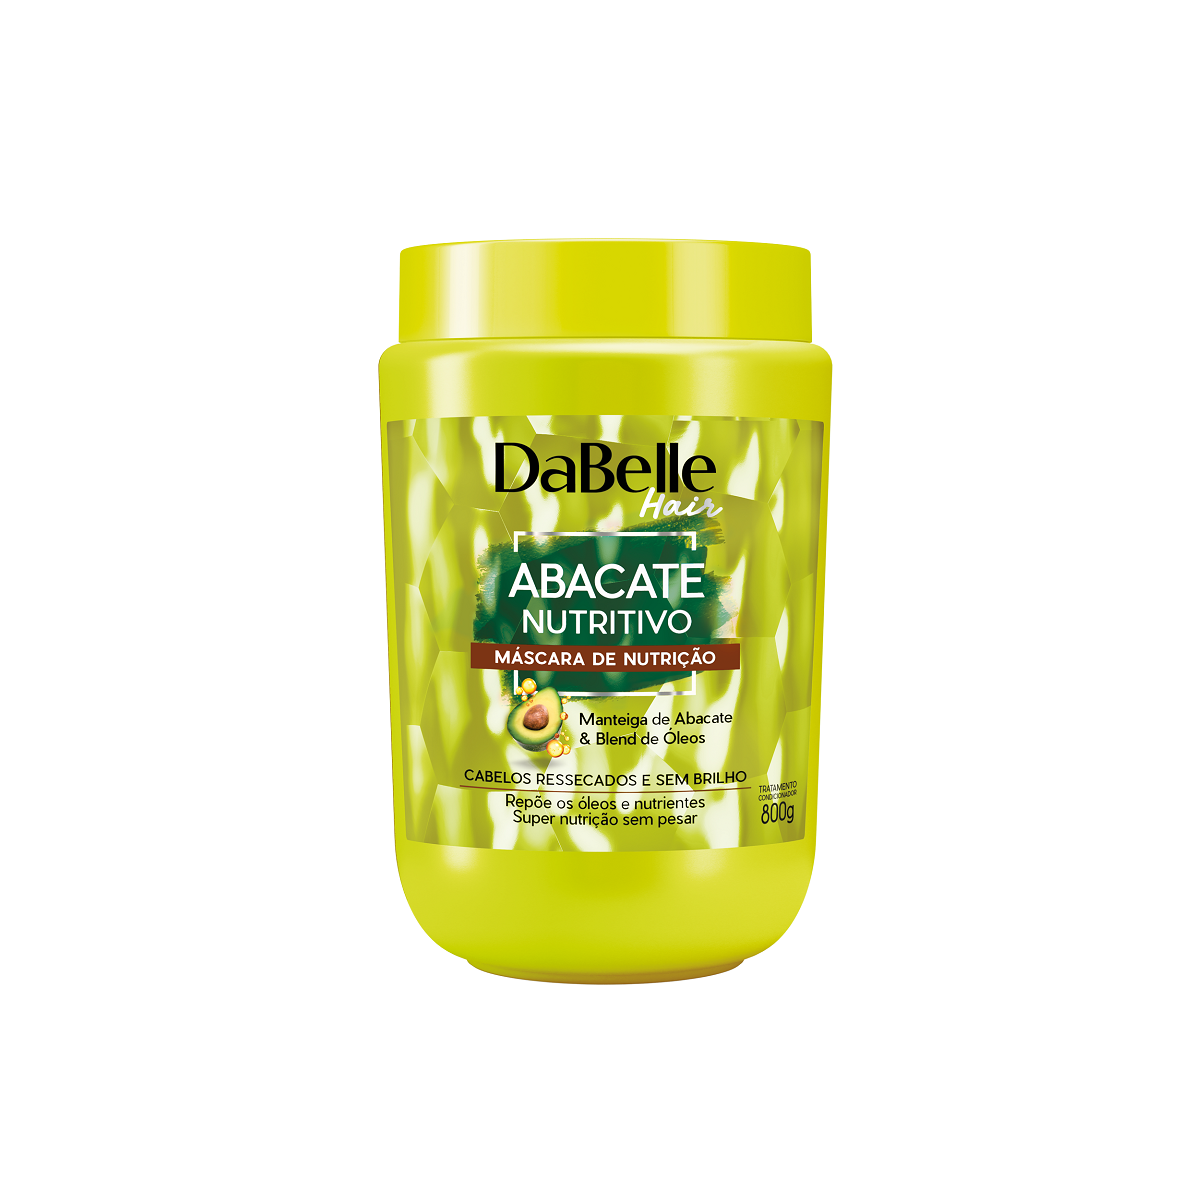 7898965666989 - CREME TRATAMENTO DABELLE 800G ABACATE